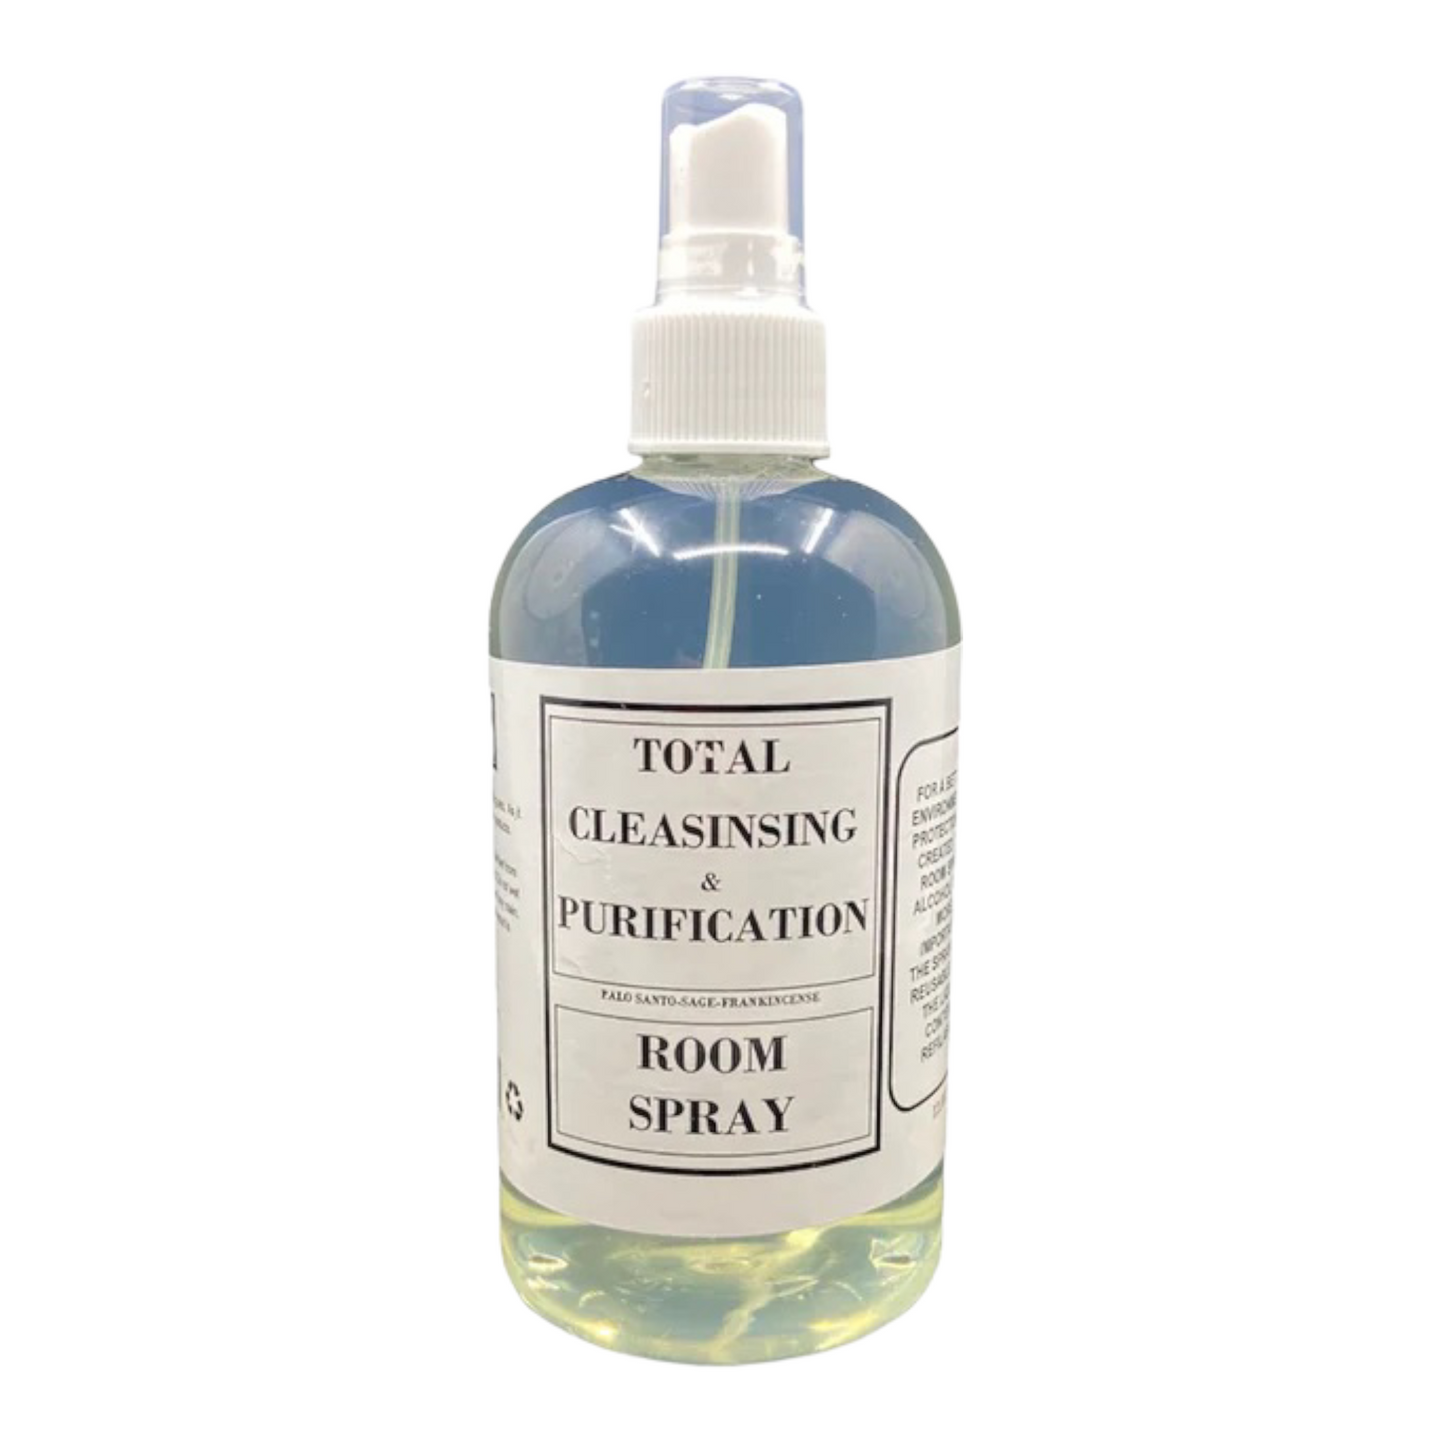 Total Cleansing & Purification Room Spray